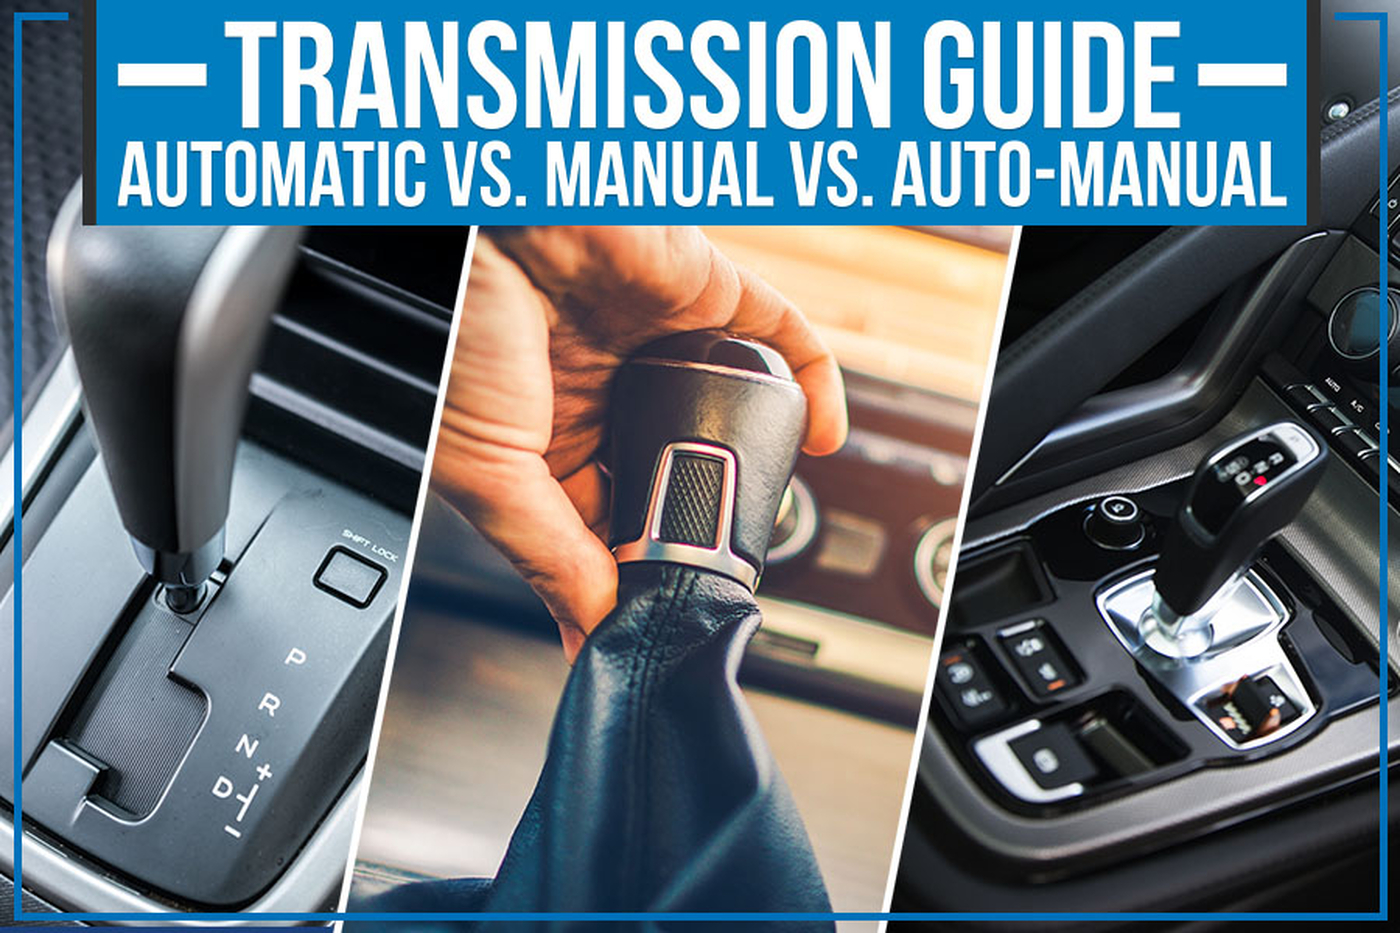 Automatics vs Manuals: How To Choose The Right Type Of Transmission For Your Car